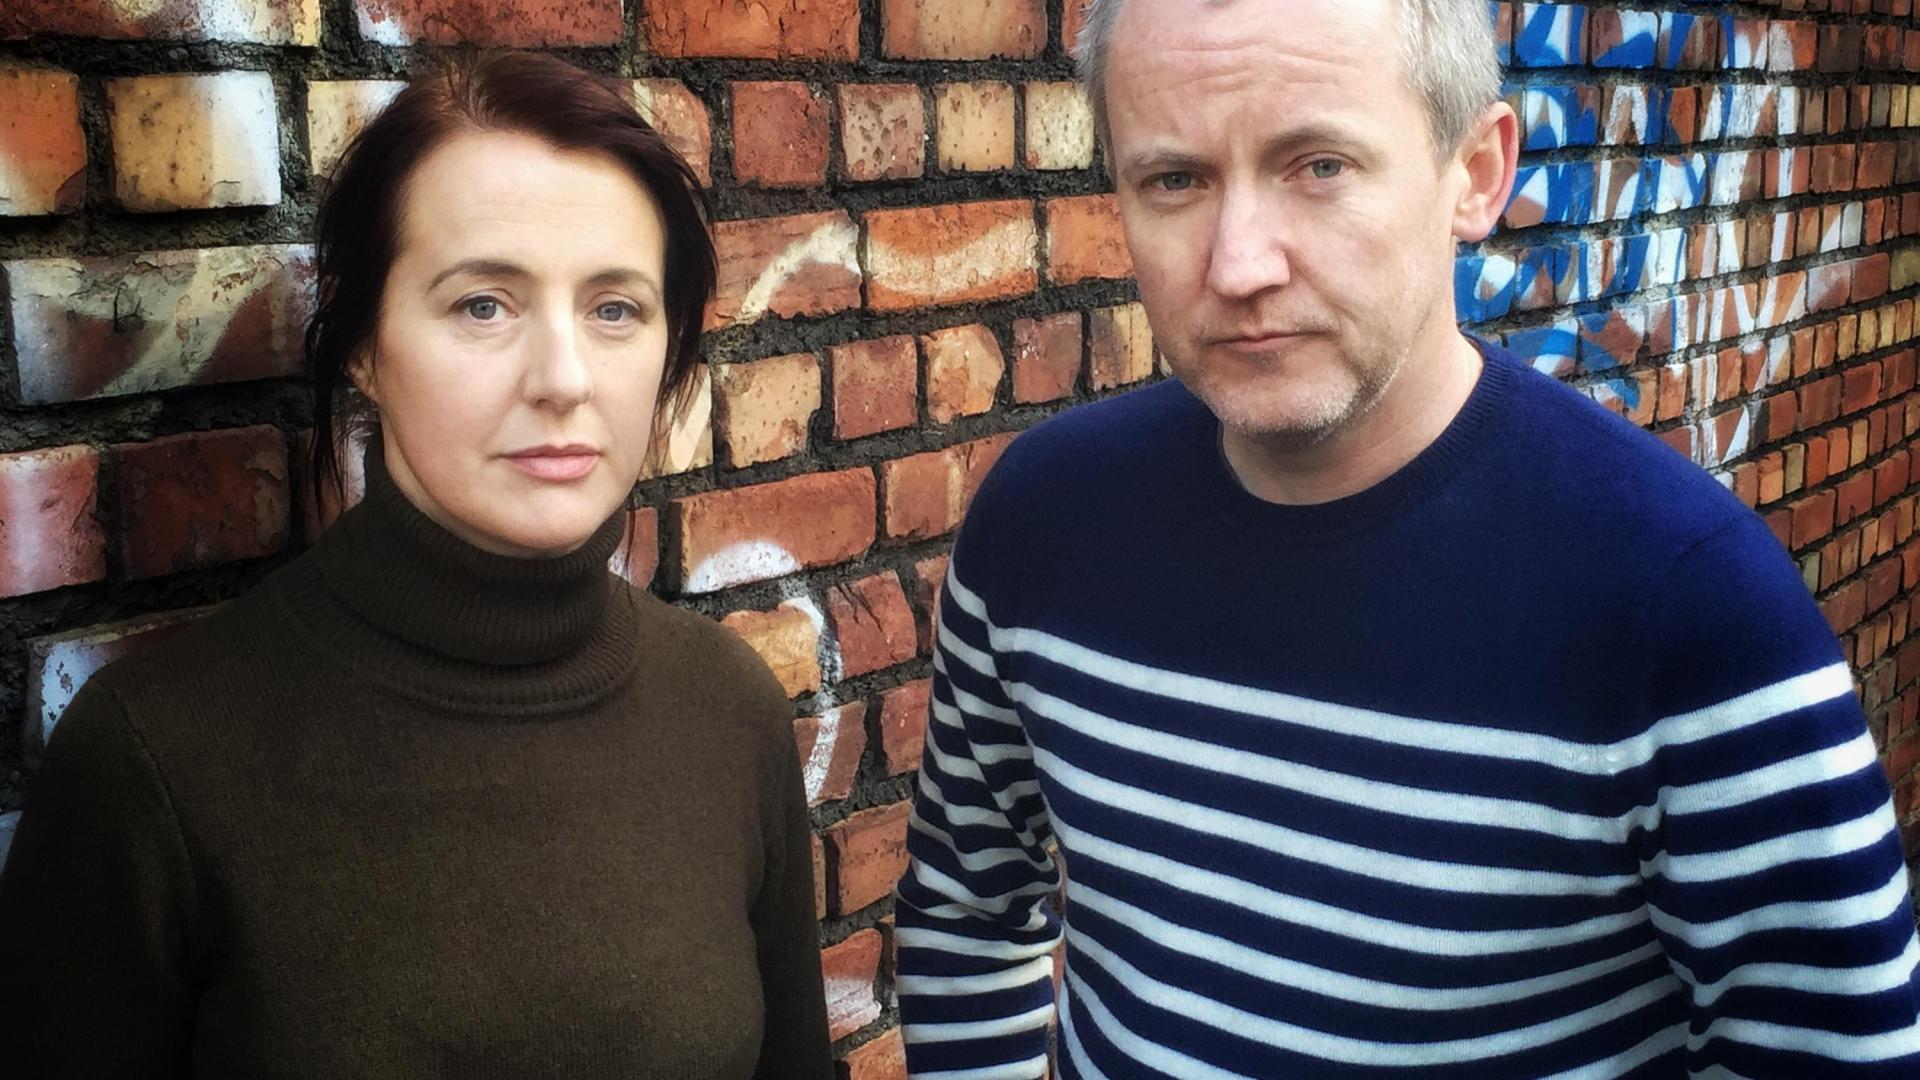 The writers and directors of 'Róise & Frank' - who are also DCU Alumni - Rachel Moriarty and Peter Murphy